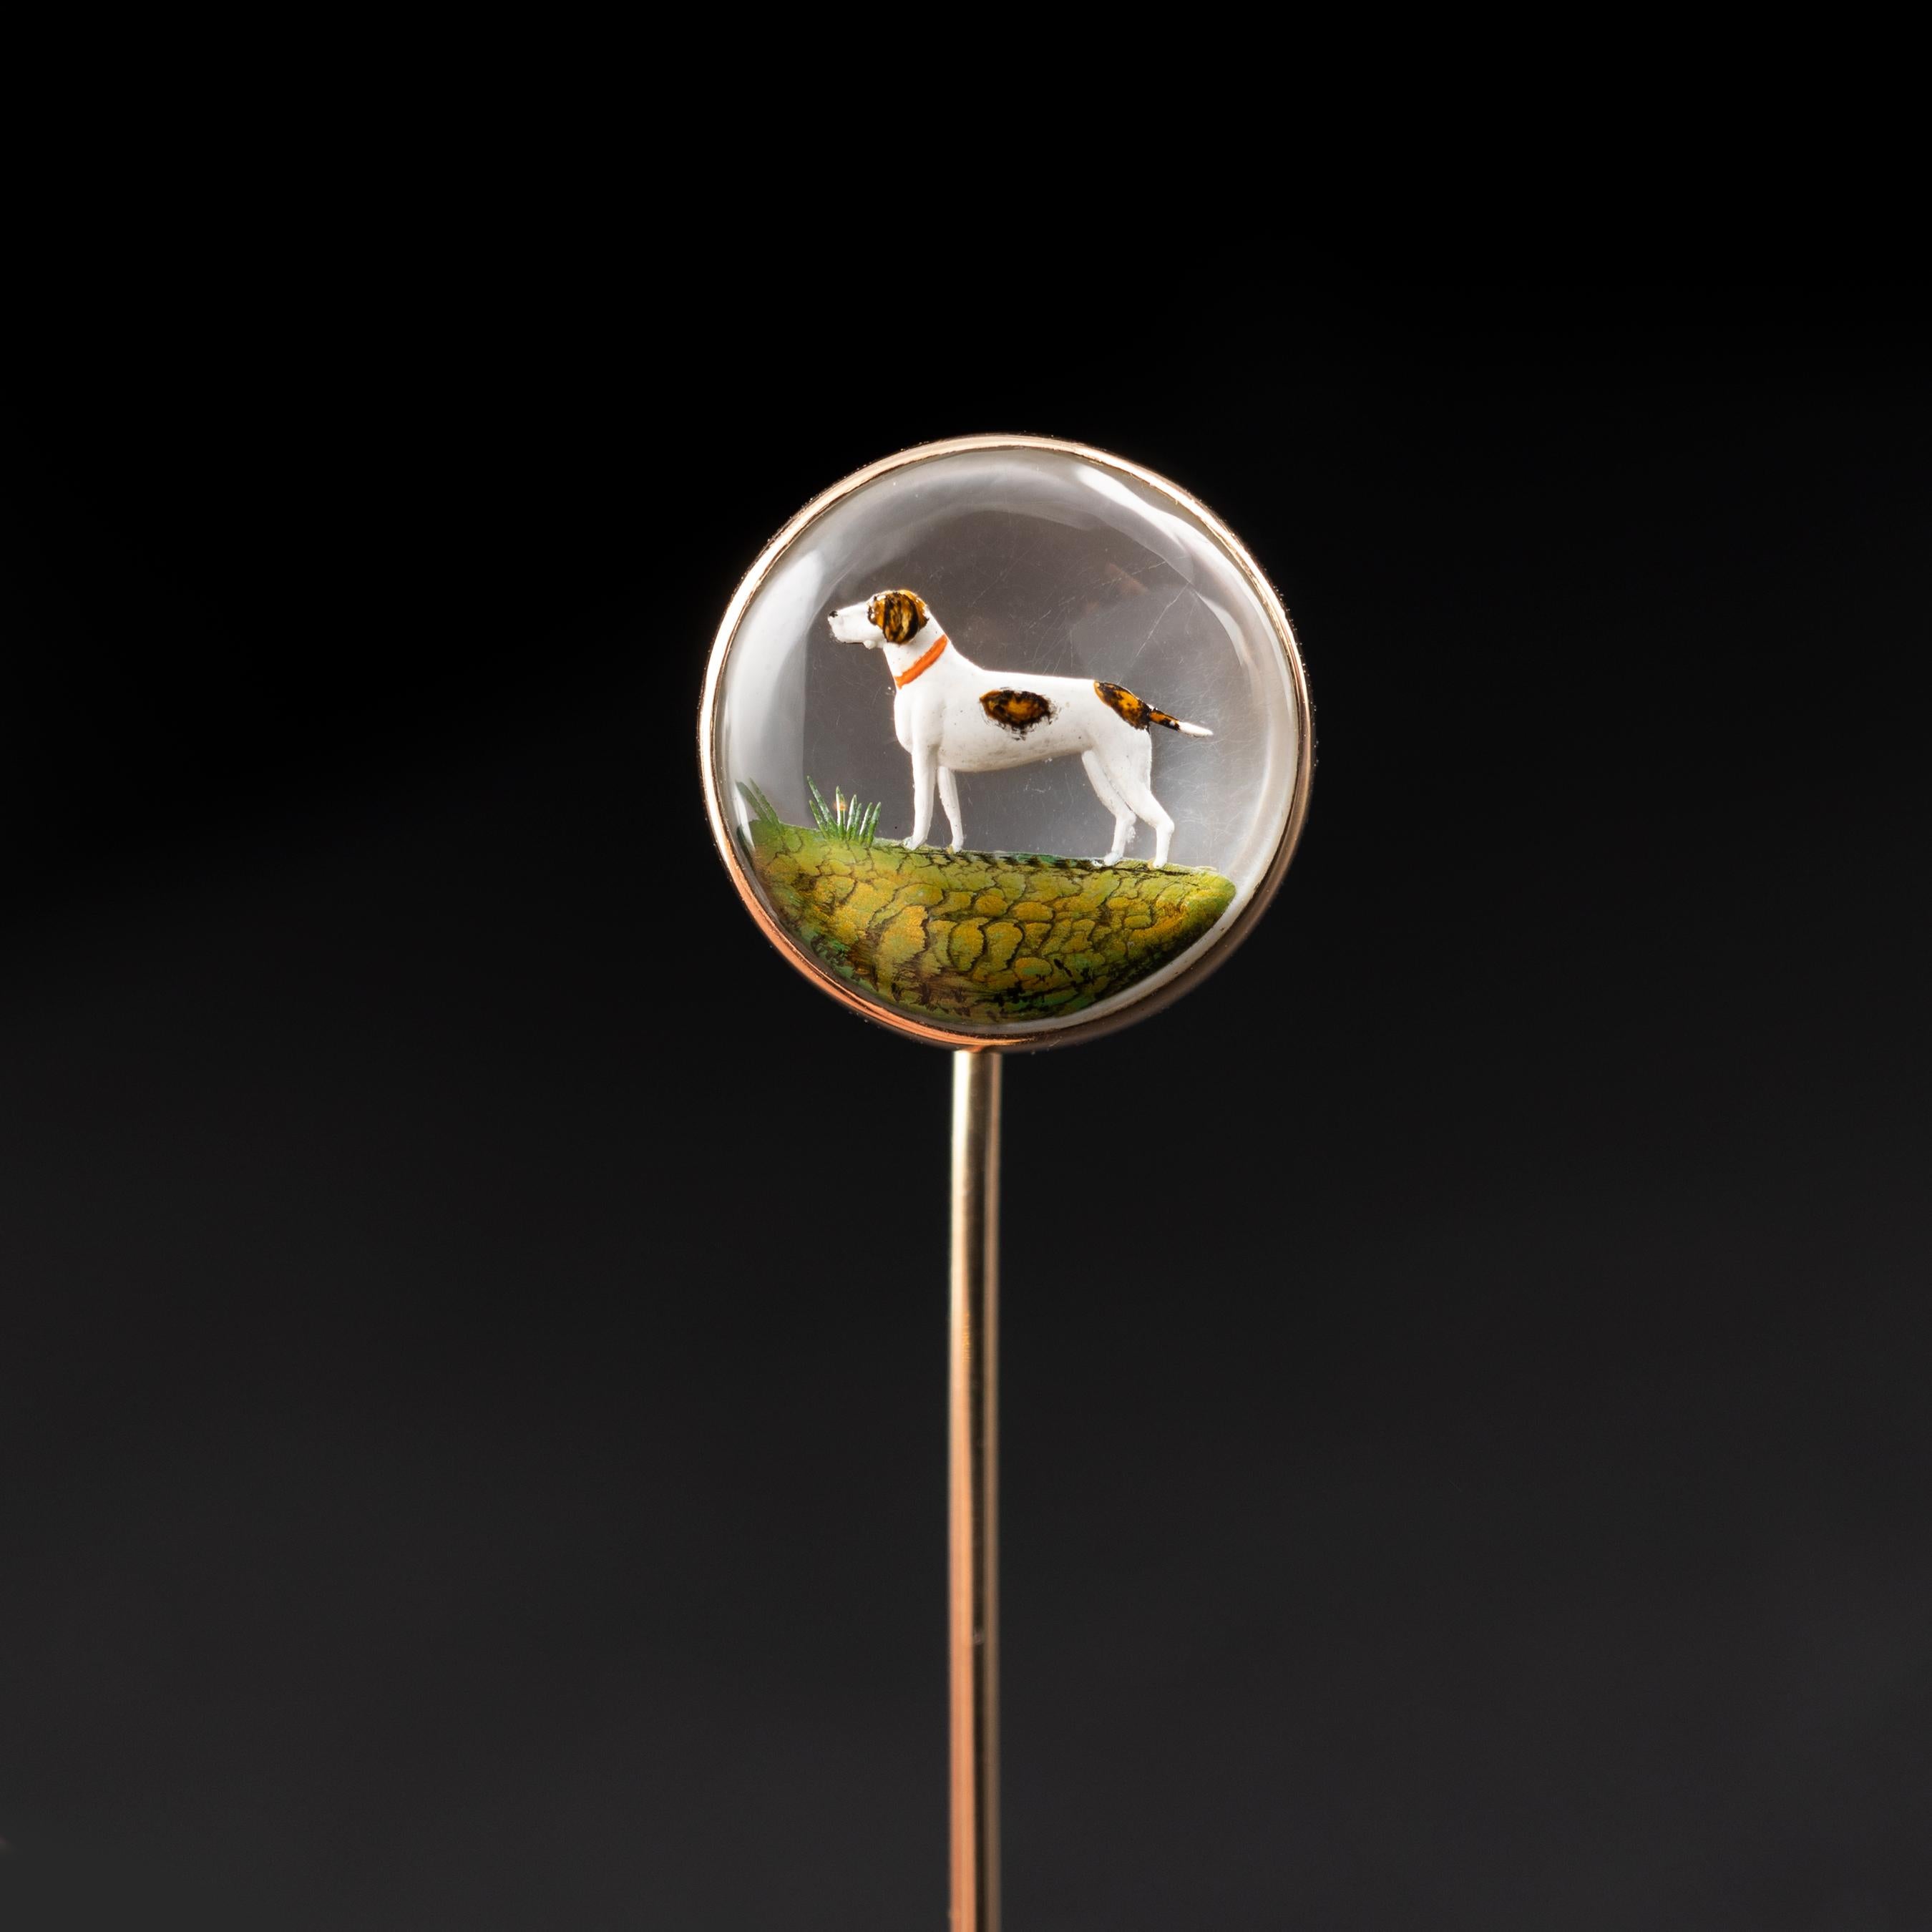 An outstanding antique Essex Crystal stick pin with pointer dog scene, Circa 1900.

The domed crystal displays the white and brown pointer dog with a red collar, standing on green iridescent foliage. The scene has been carved into the back of a